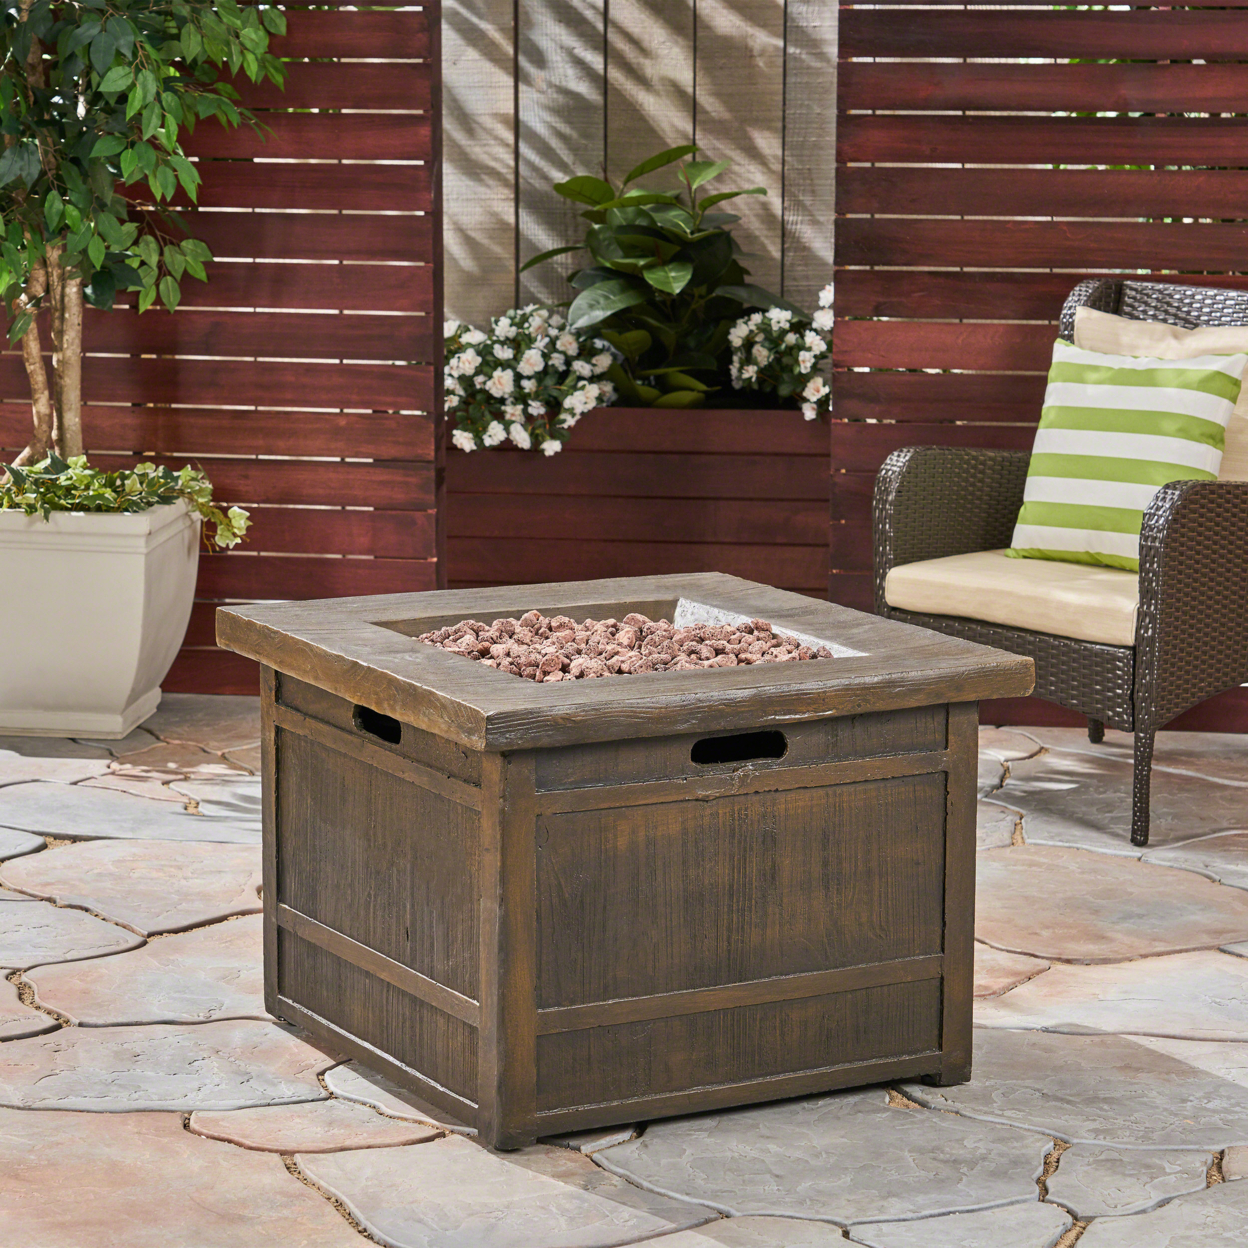 Land Backyard Fire Pit 32-inch By 32-inch Gas-Burning Lightweight Concrete Natural Wood Finish